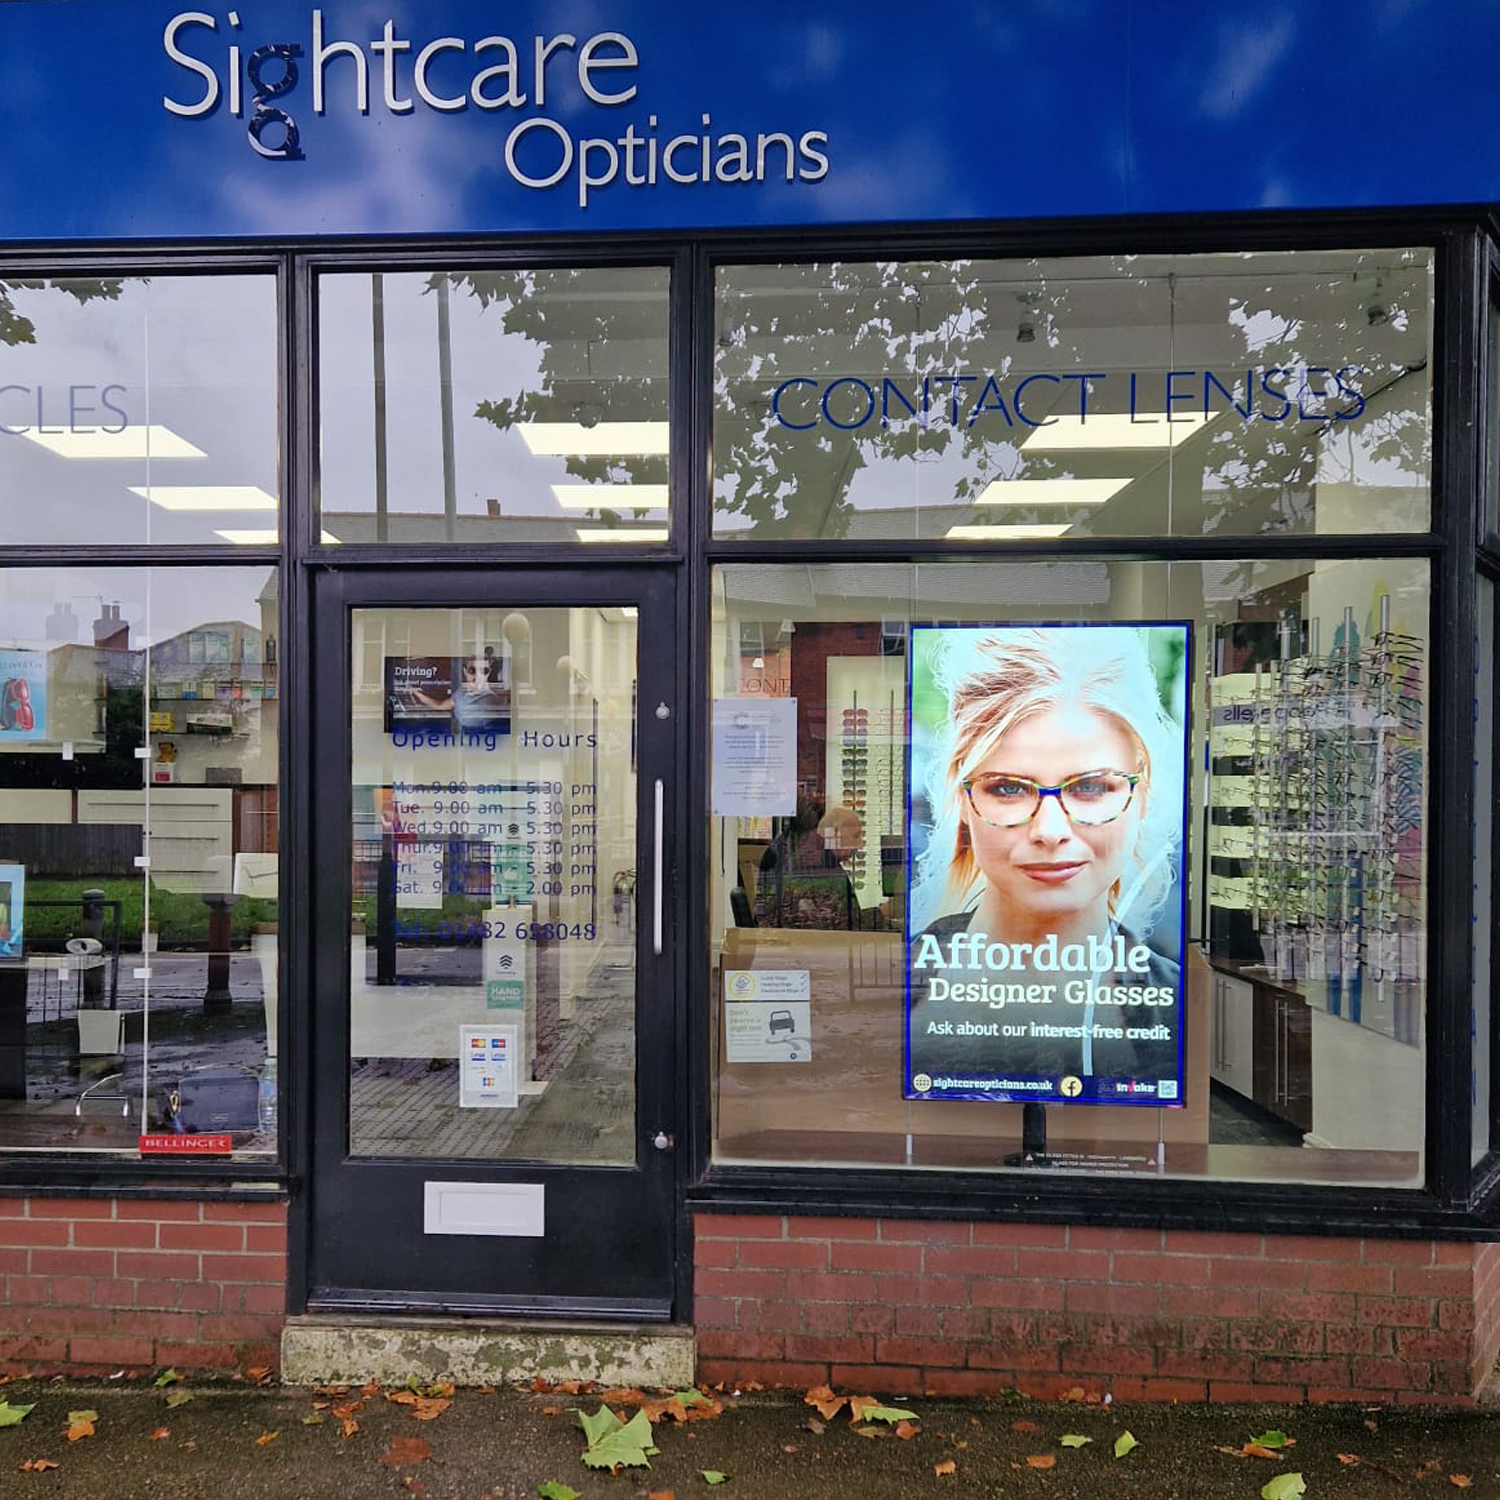 sightcare opticians using a shop window screen to advertise designer glasses and free consultations